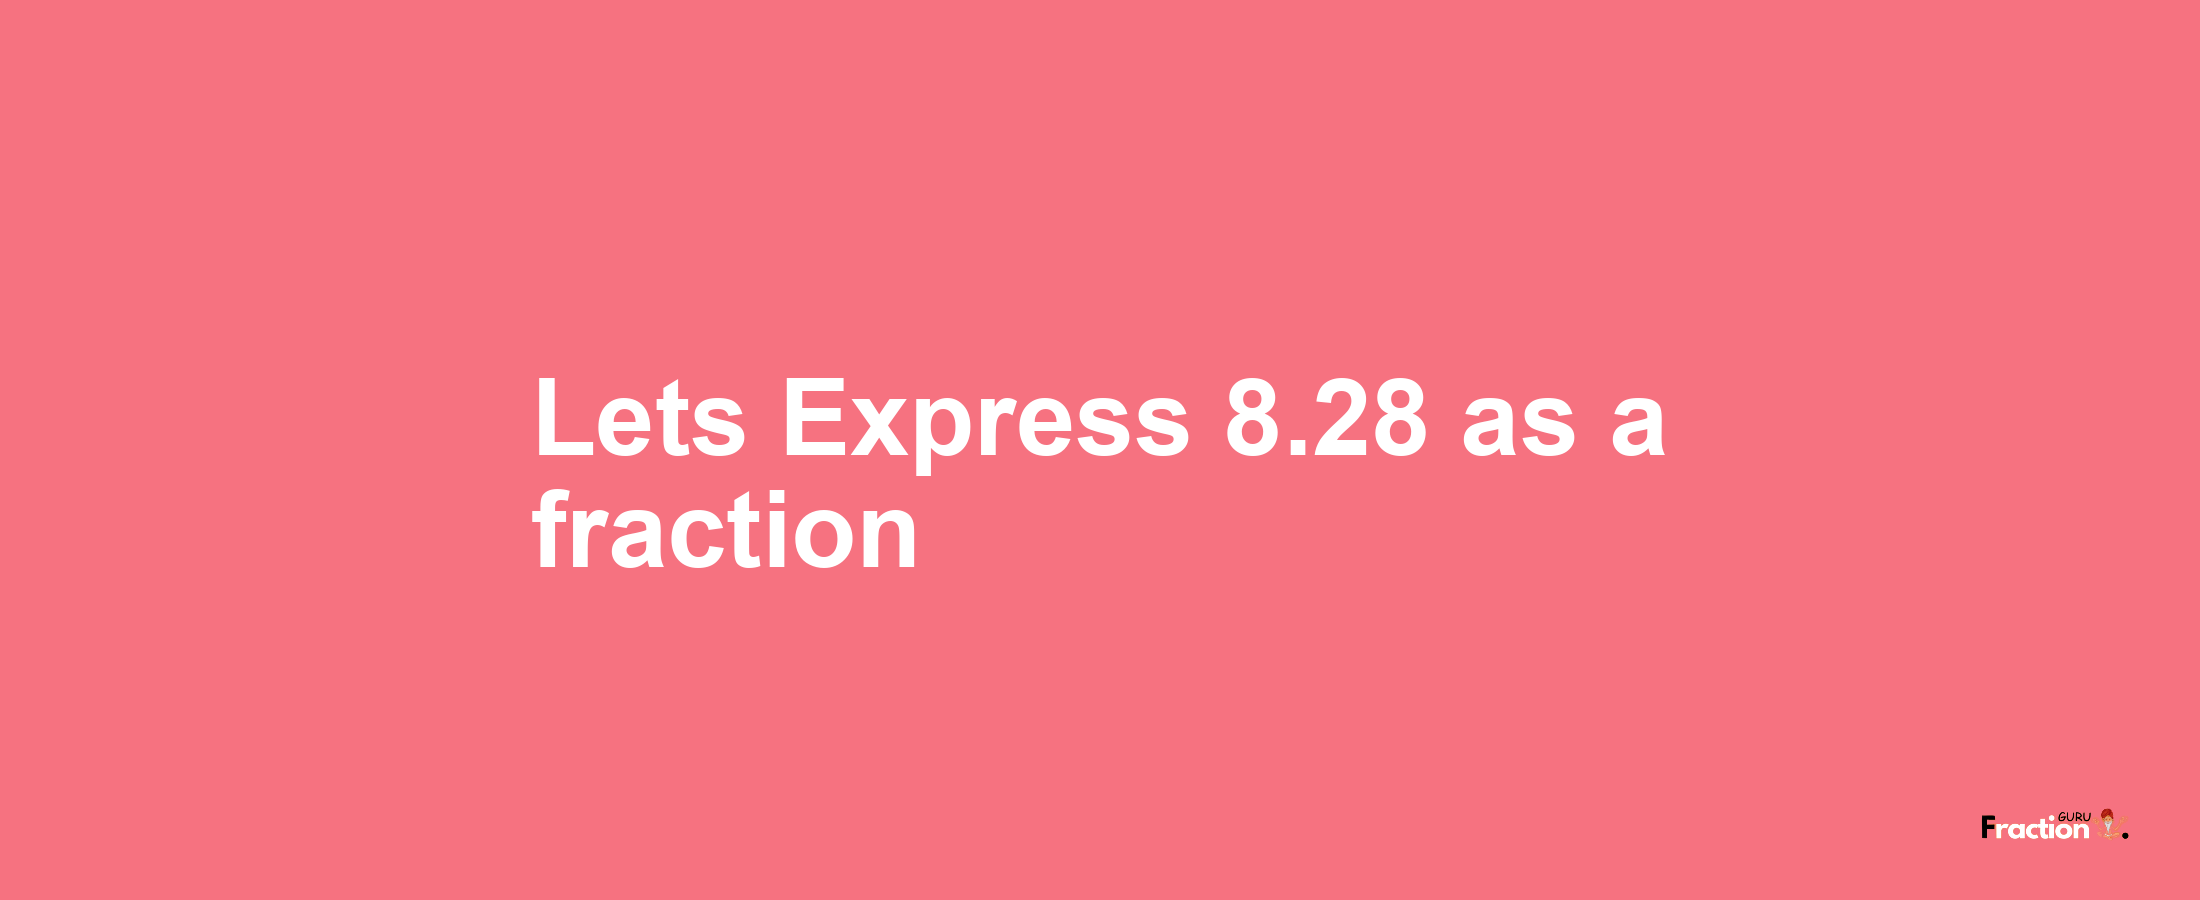 Lets Express 8.28 as afraction